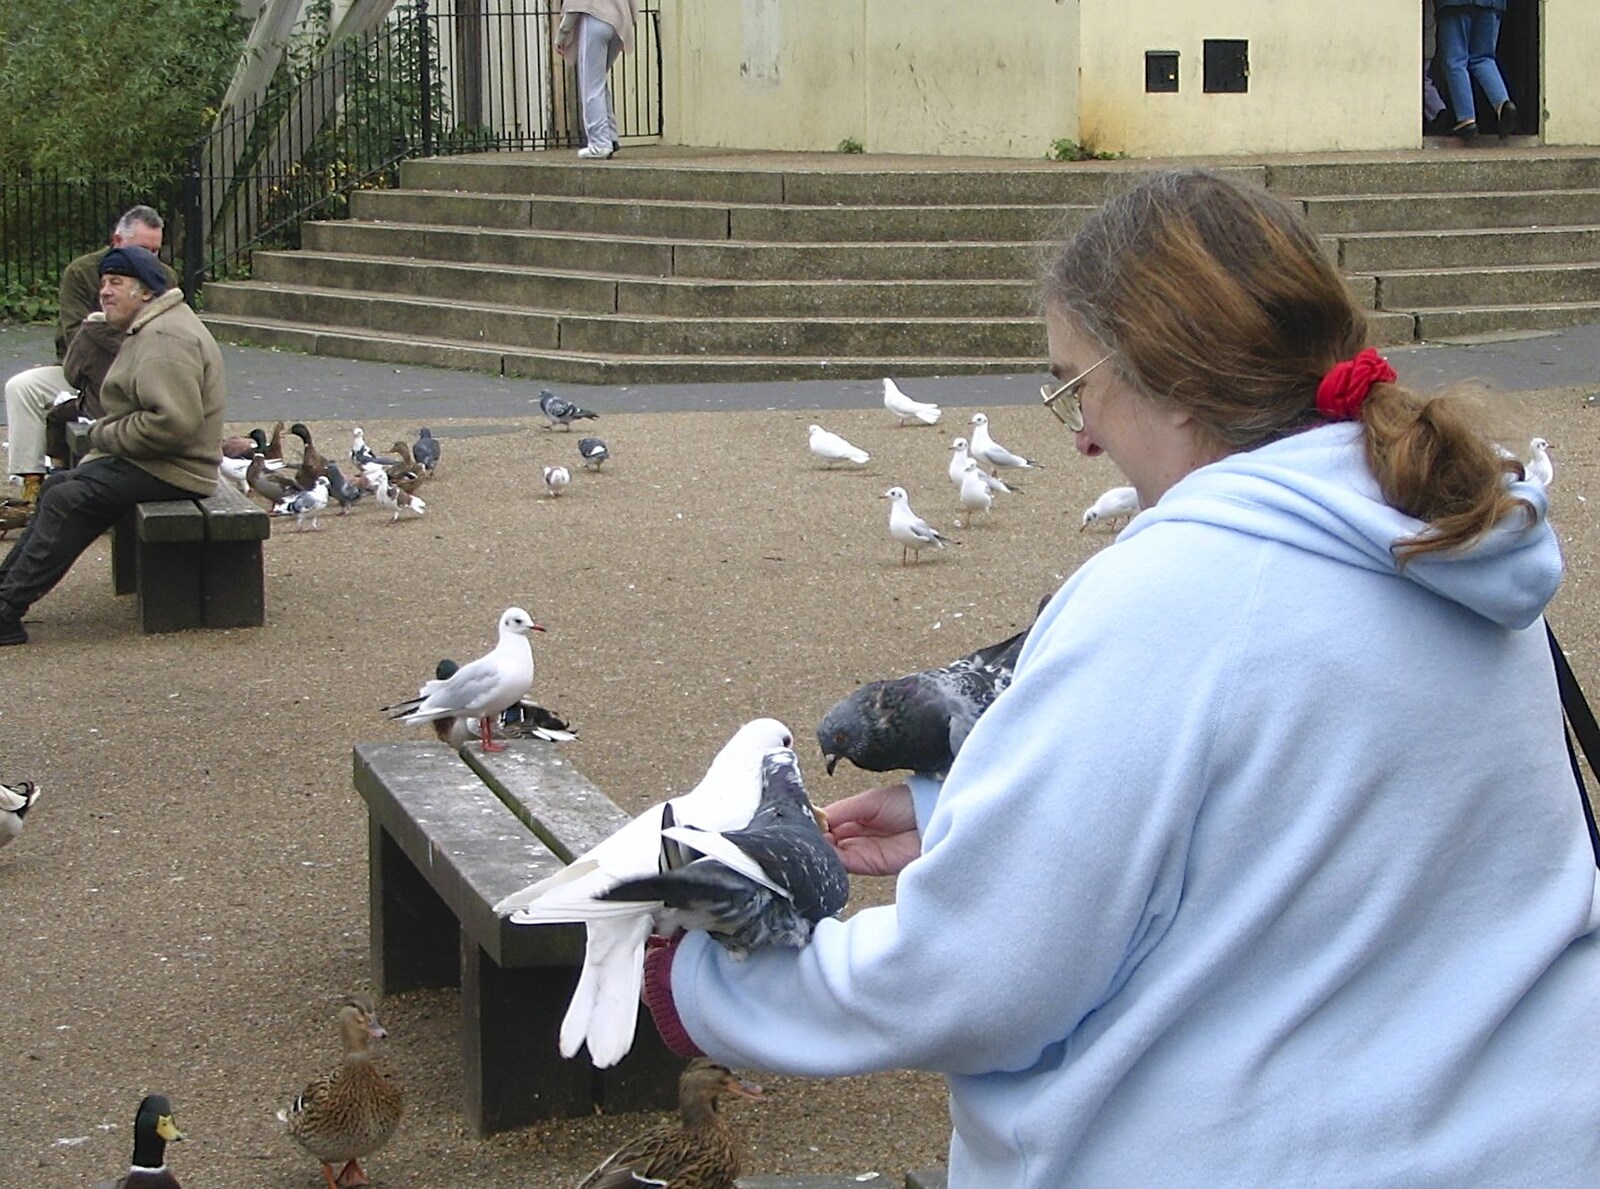 Feeding the pigeons from Feeding the Ducks: a Diss and Norwich Miscellany - 7th November 2004